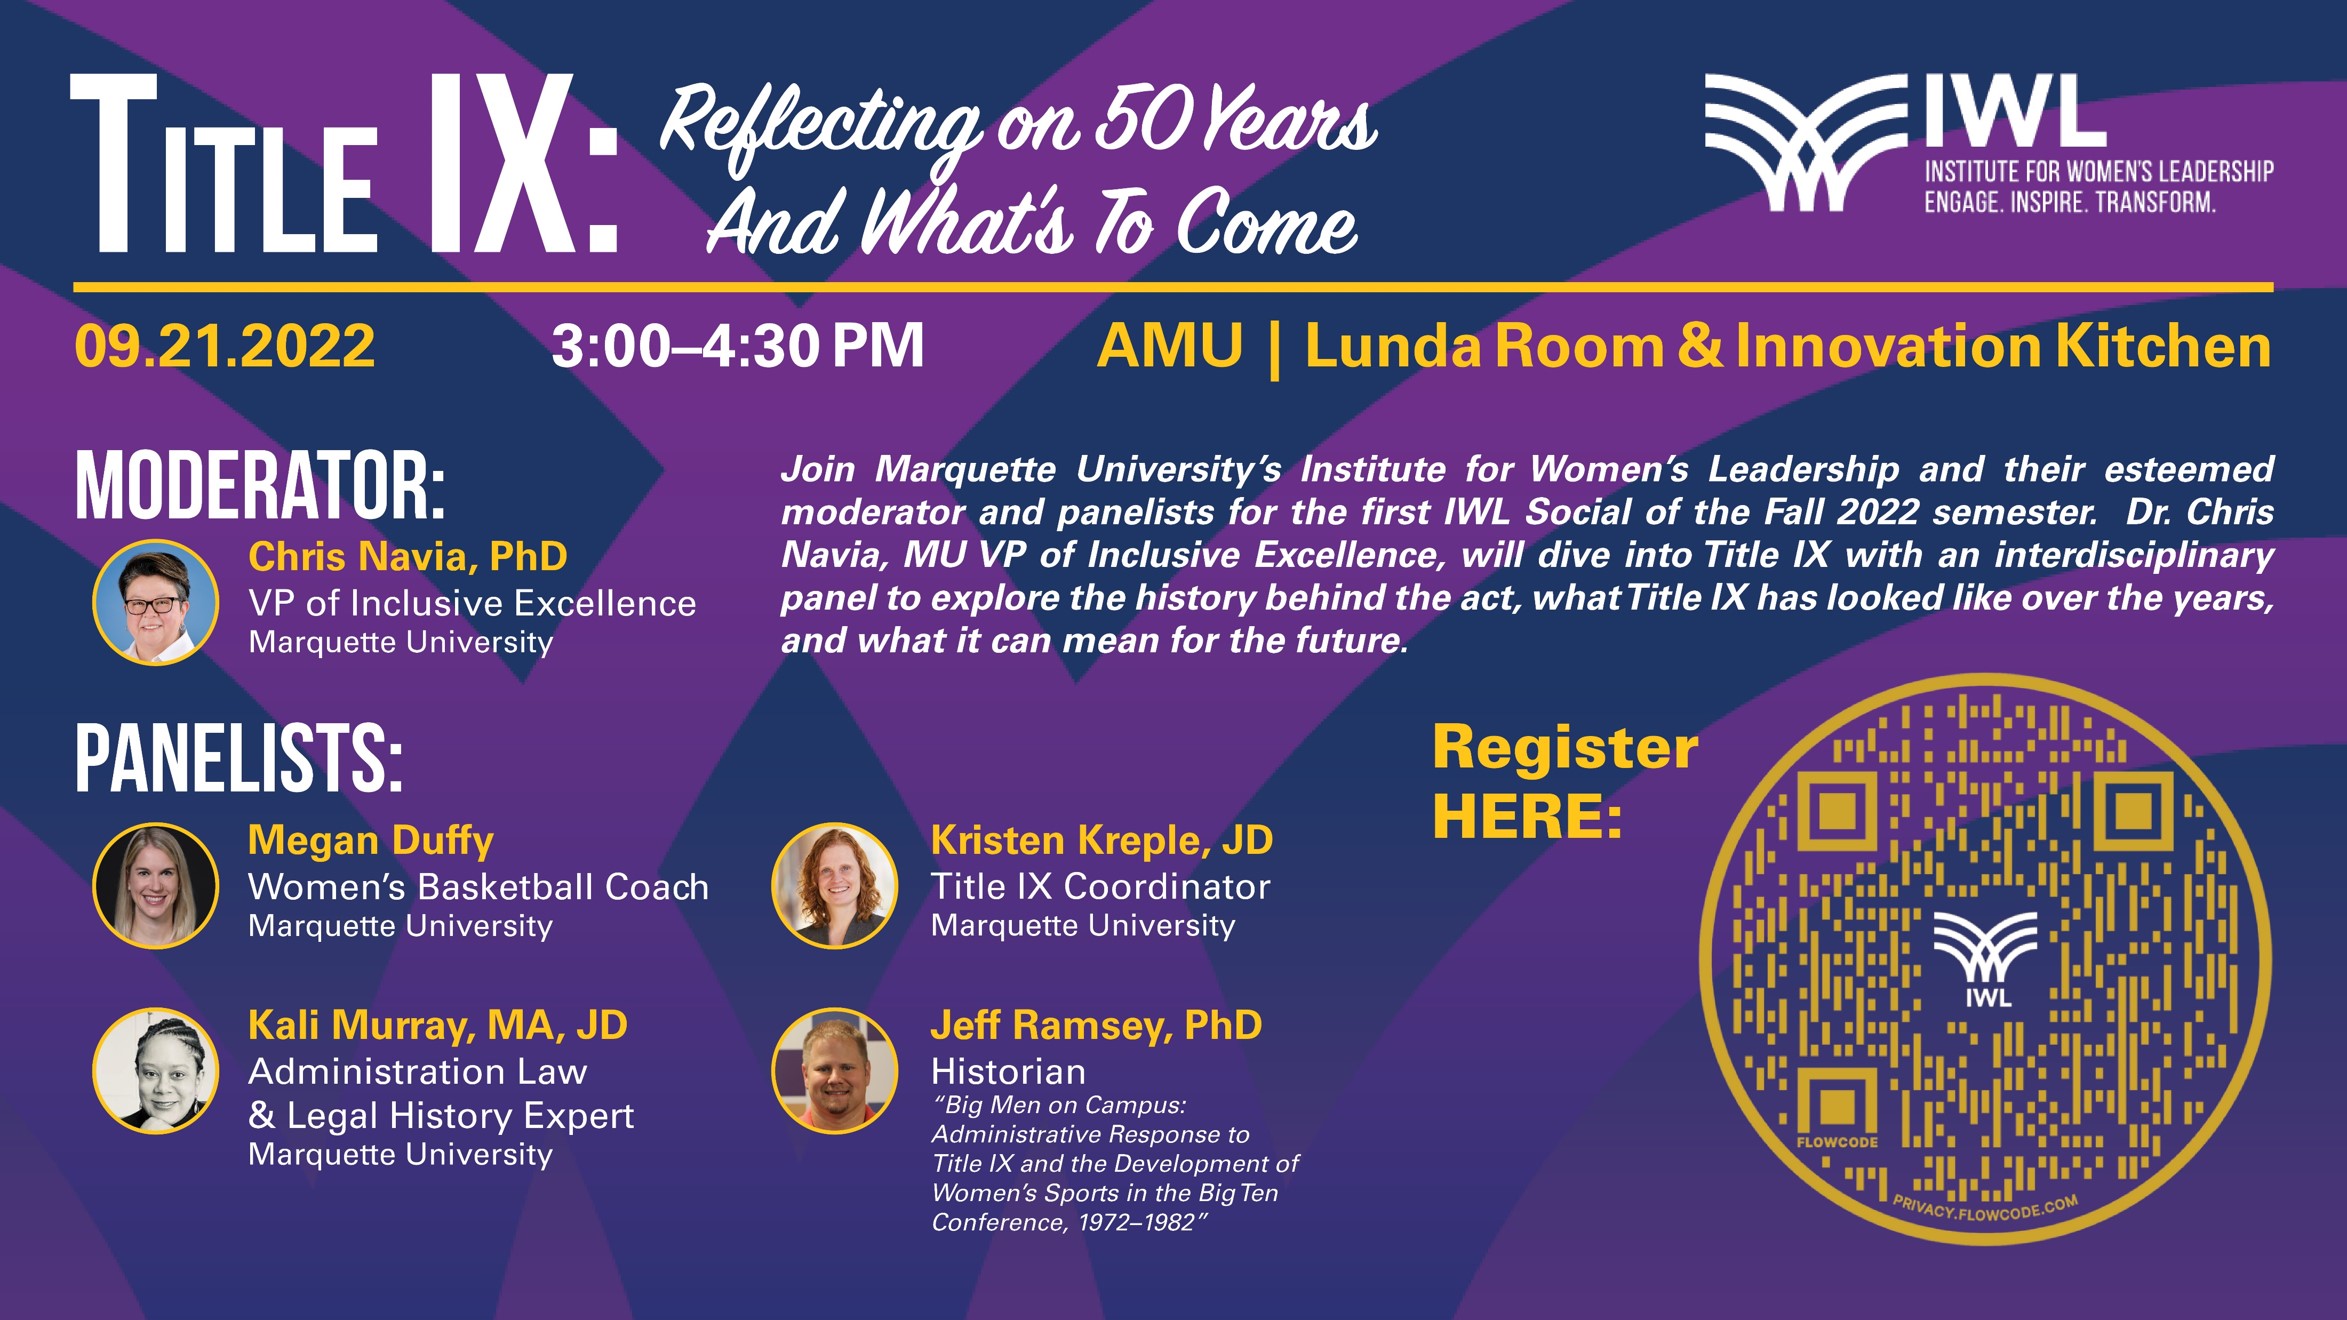 flyer for IWL's event on 50th Anniversary of Title IX